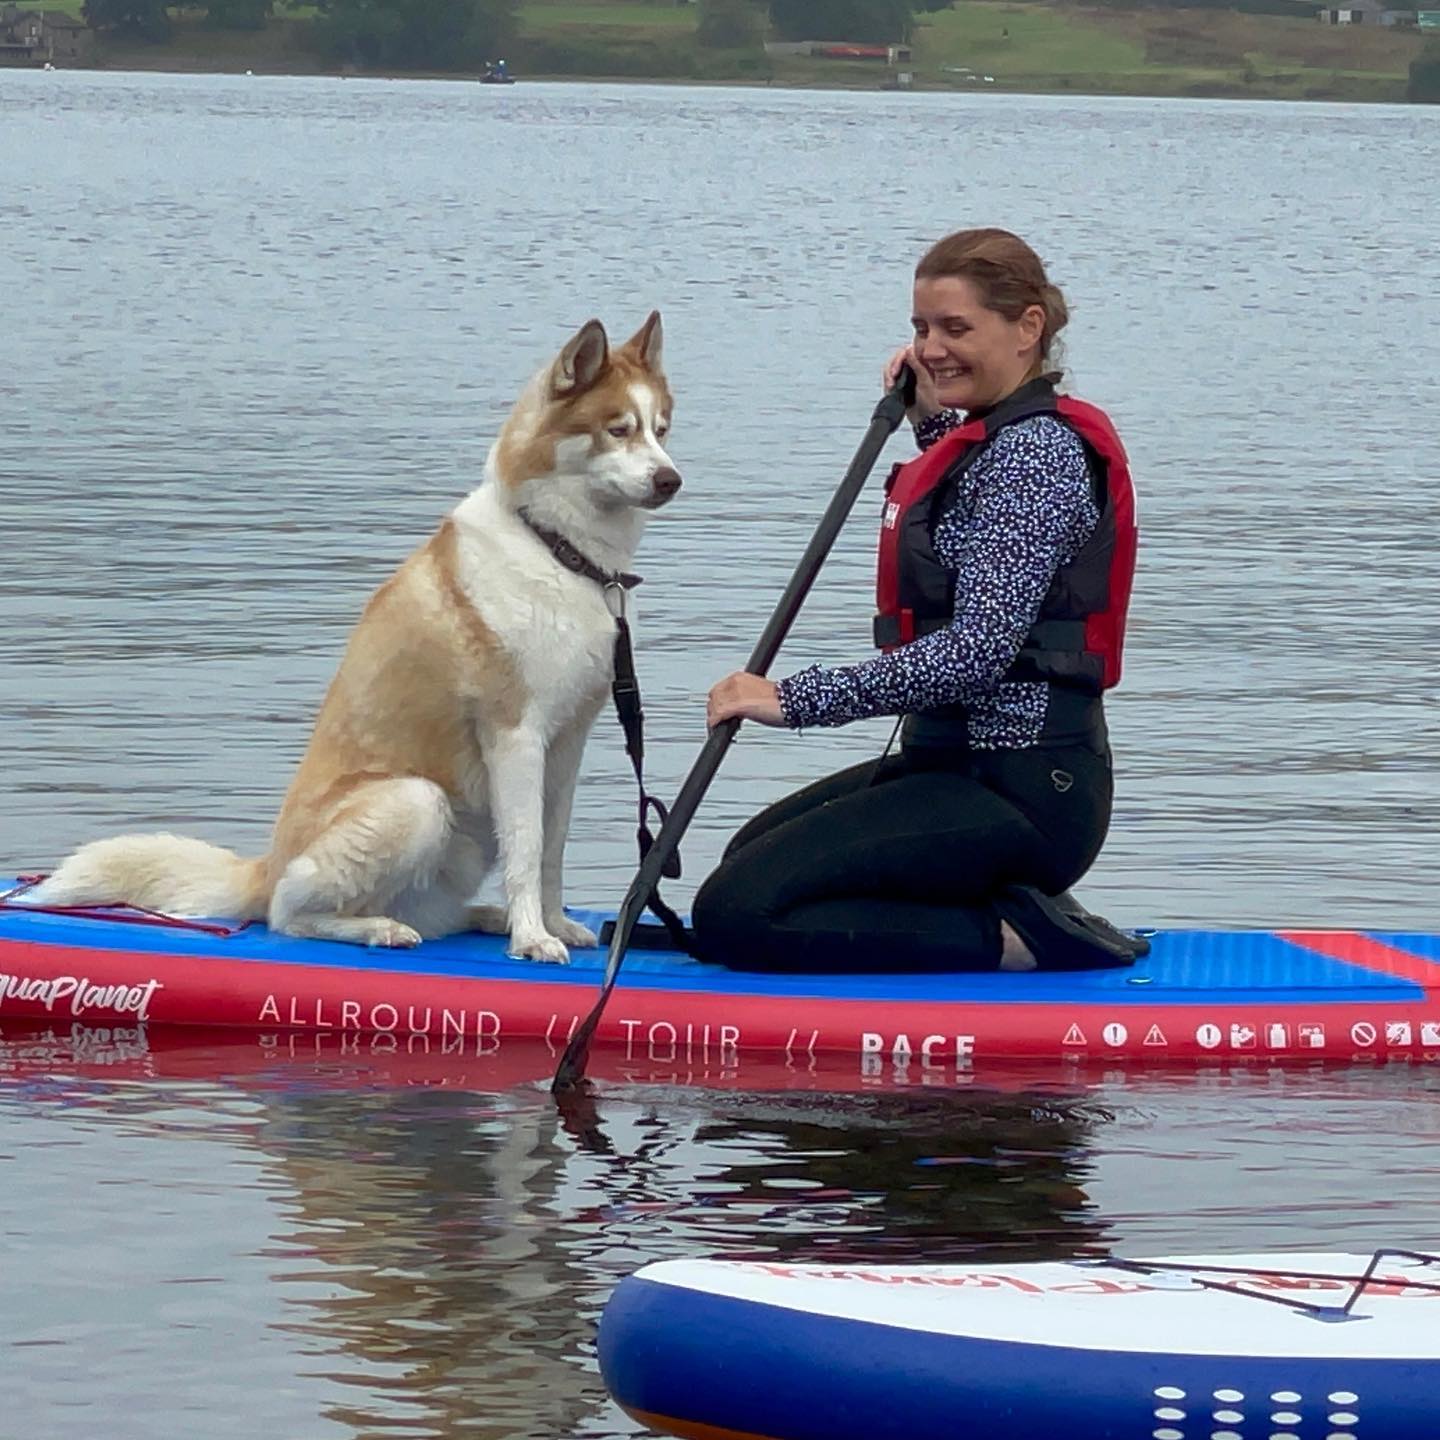 Even the dog is better at this than me! #paddleboarding #ullswater